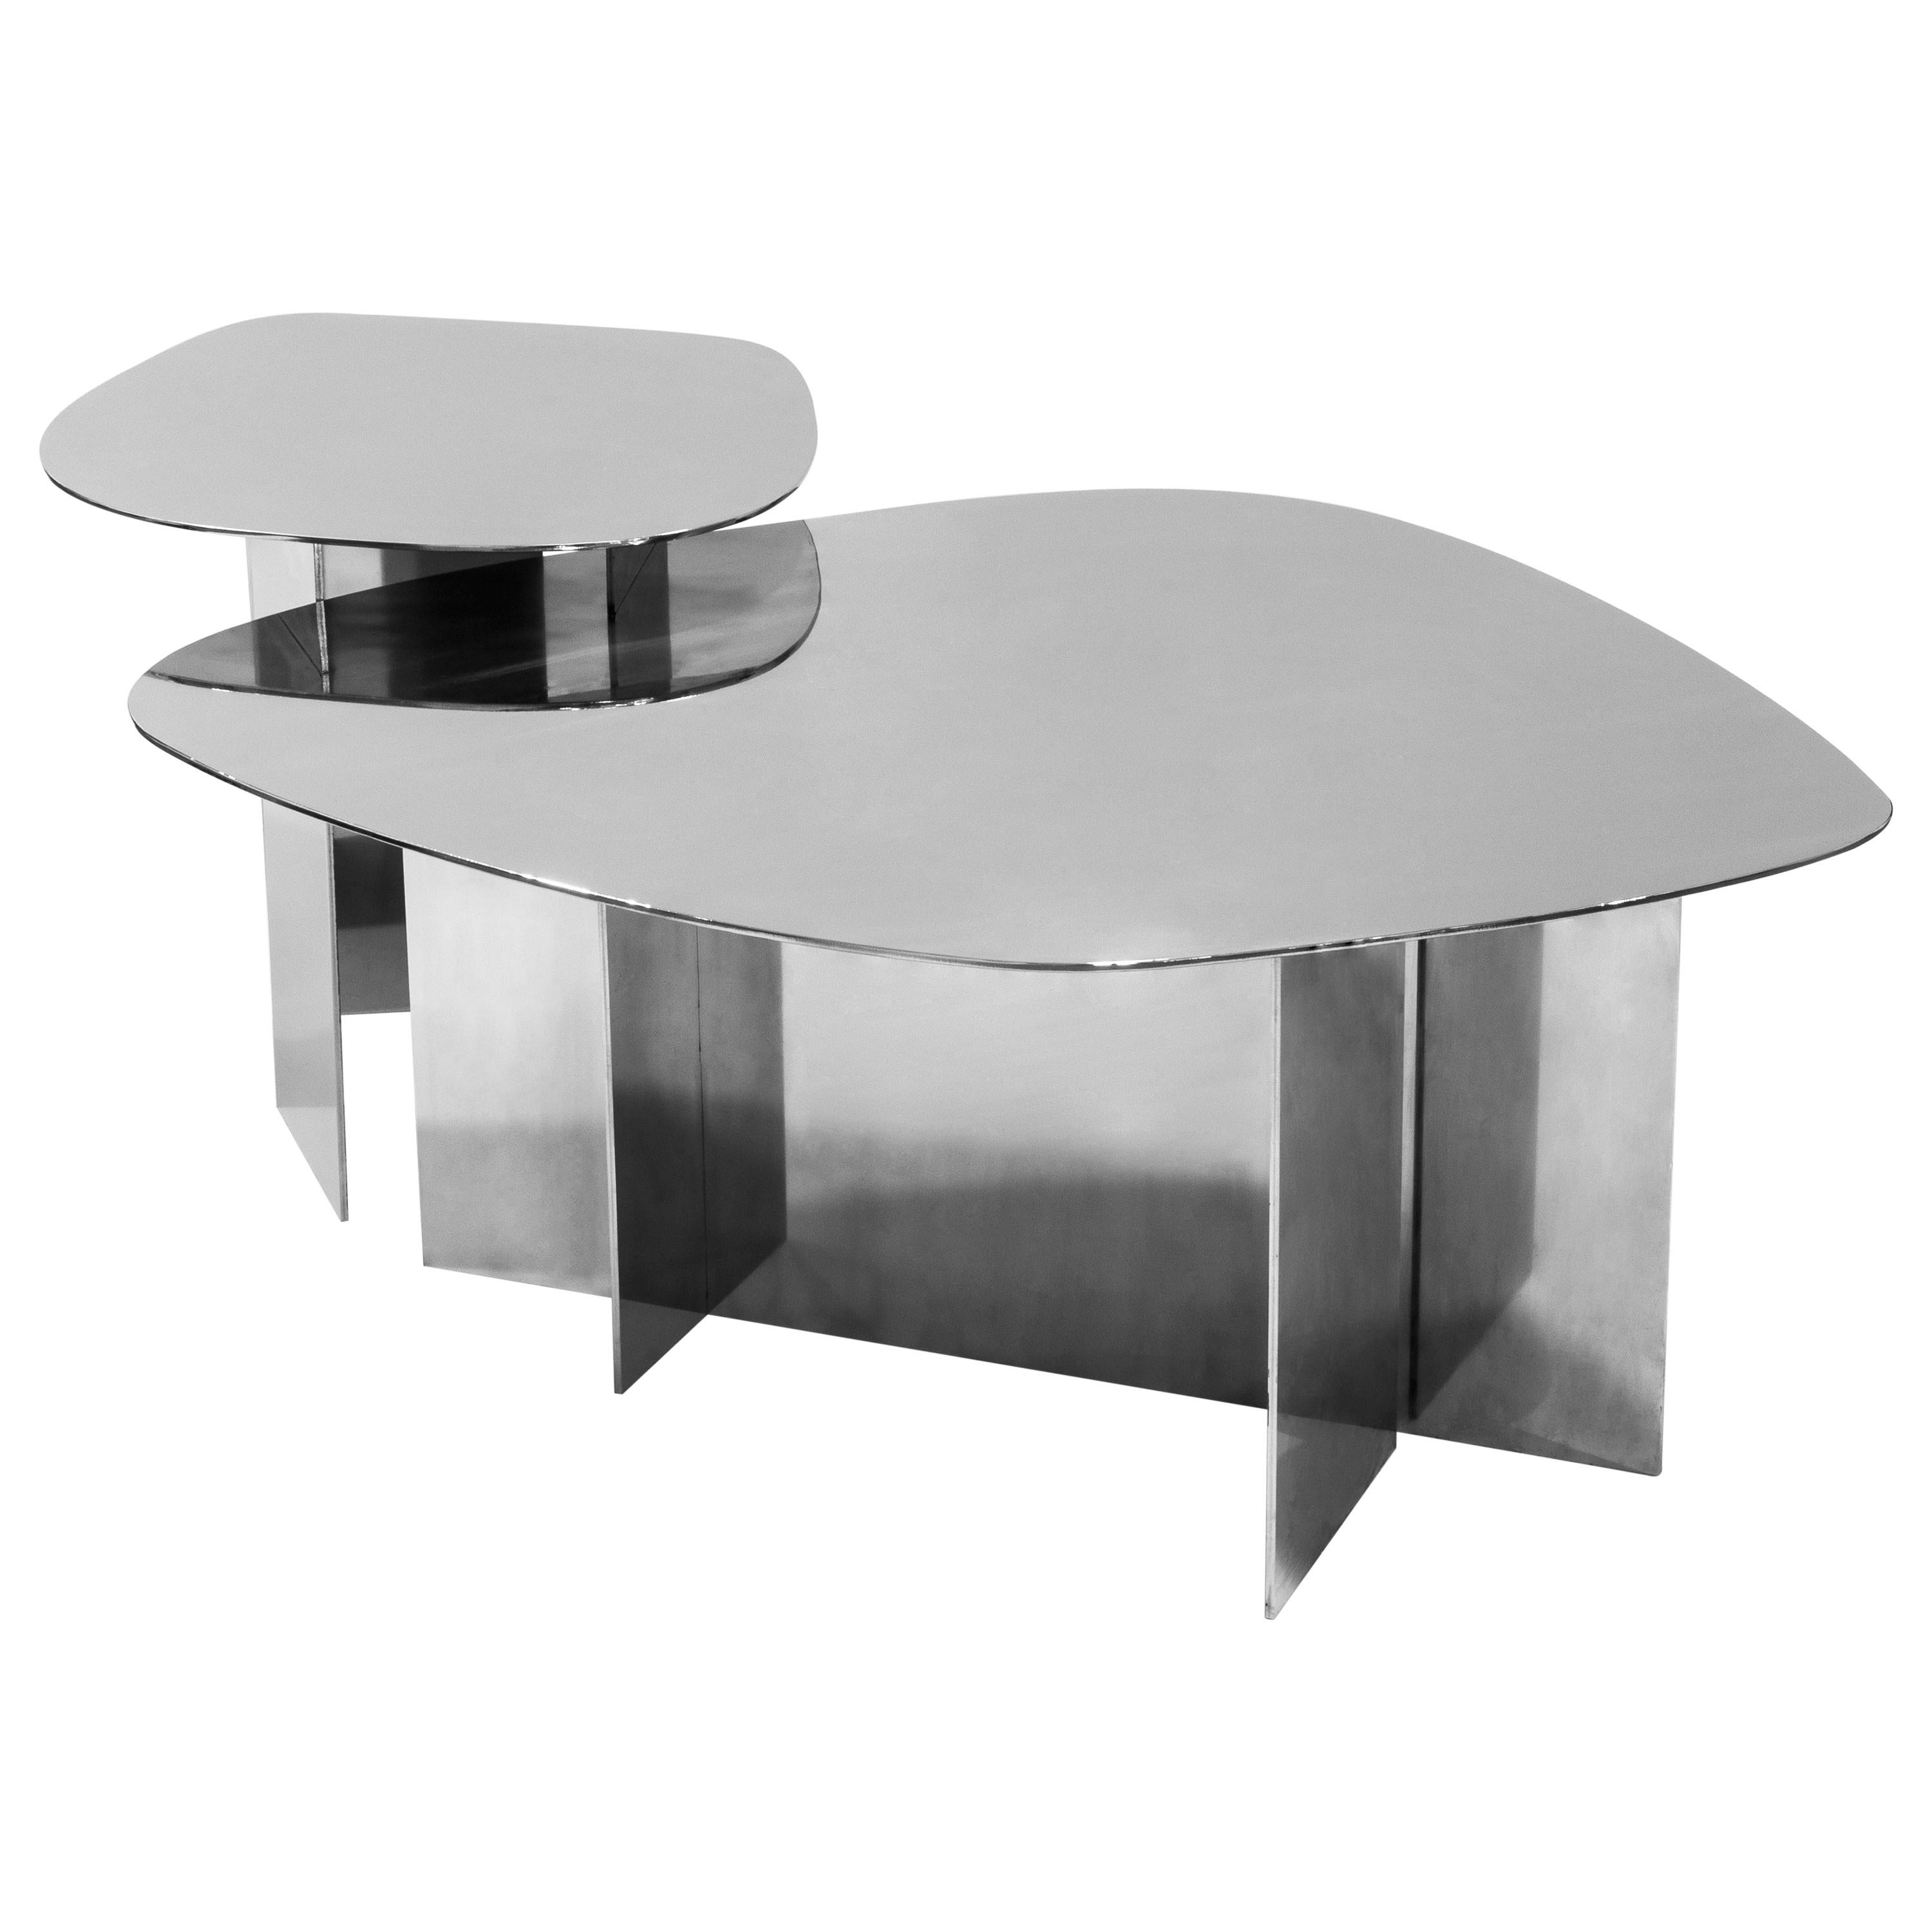 LT02 Coffee Table in Polished Steel by Sabourin Costes, France, 2020 For Sale